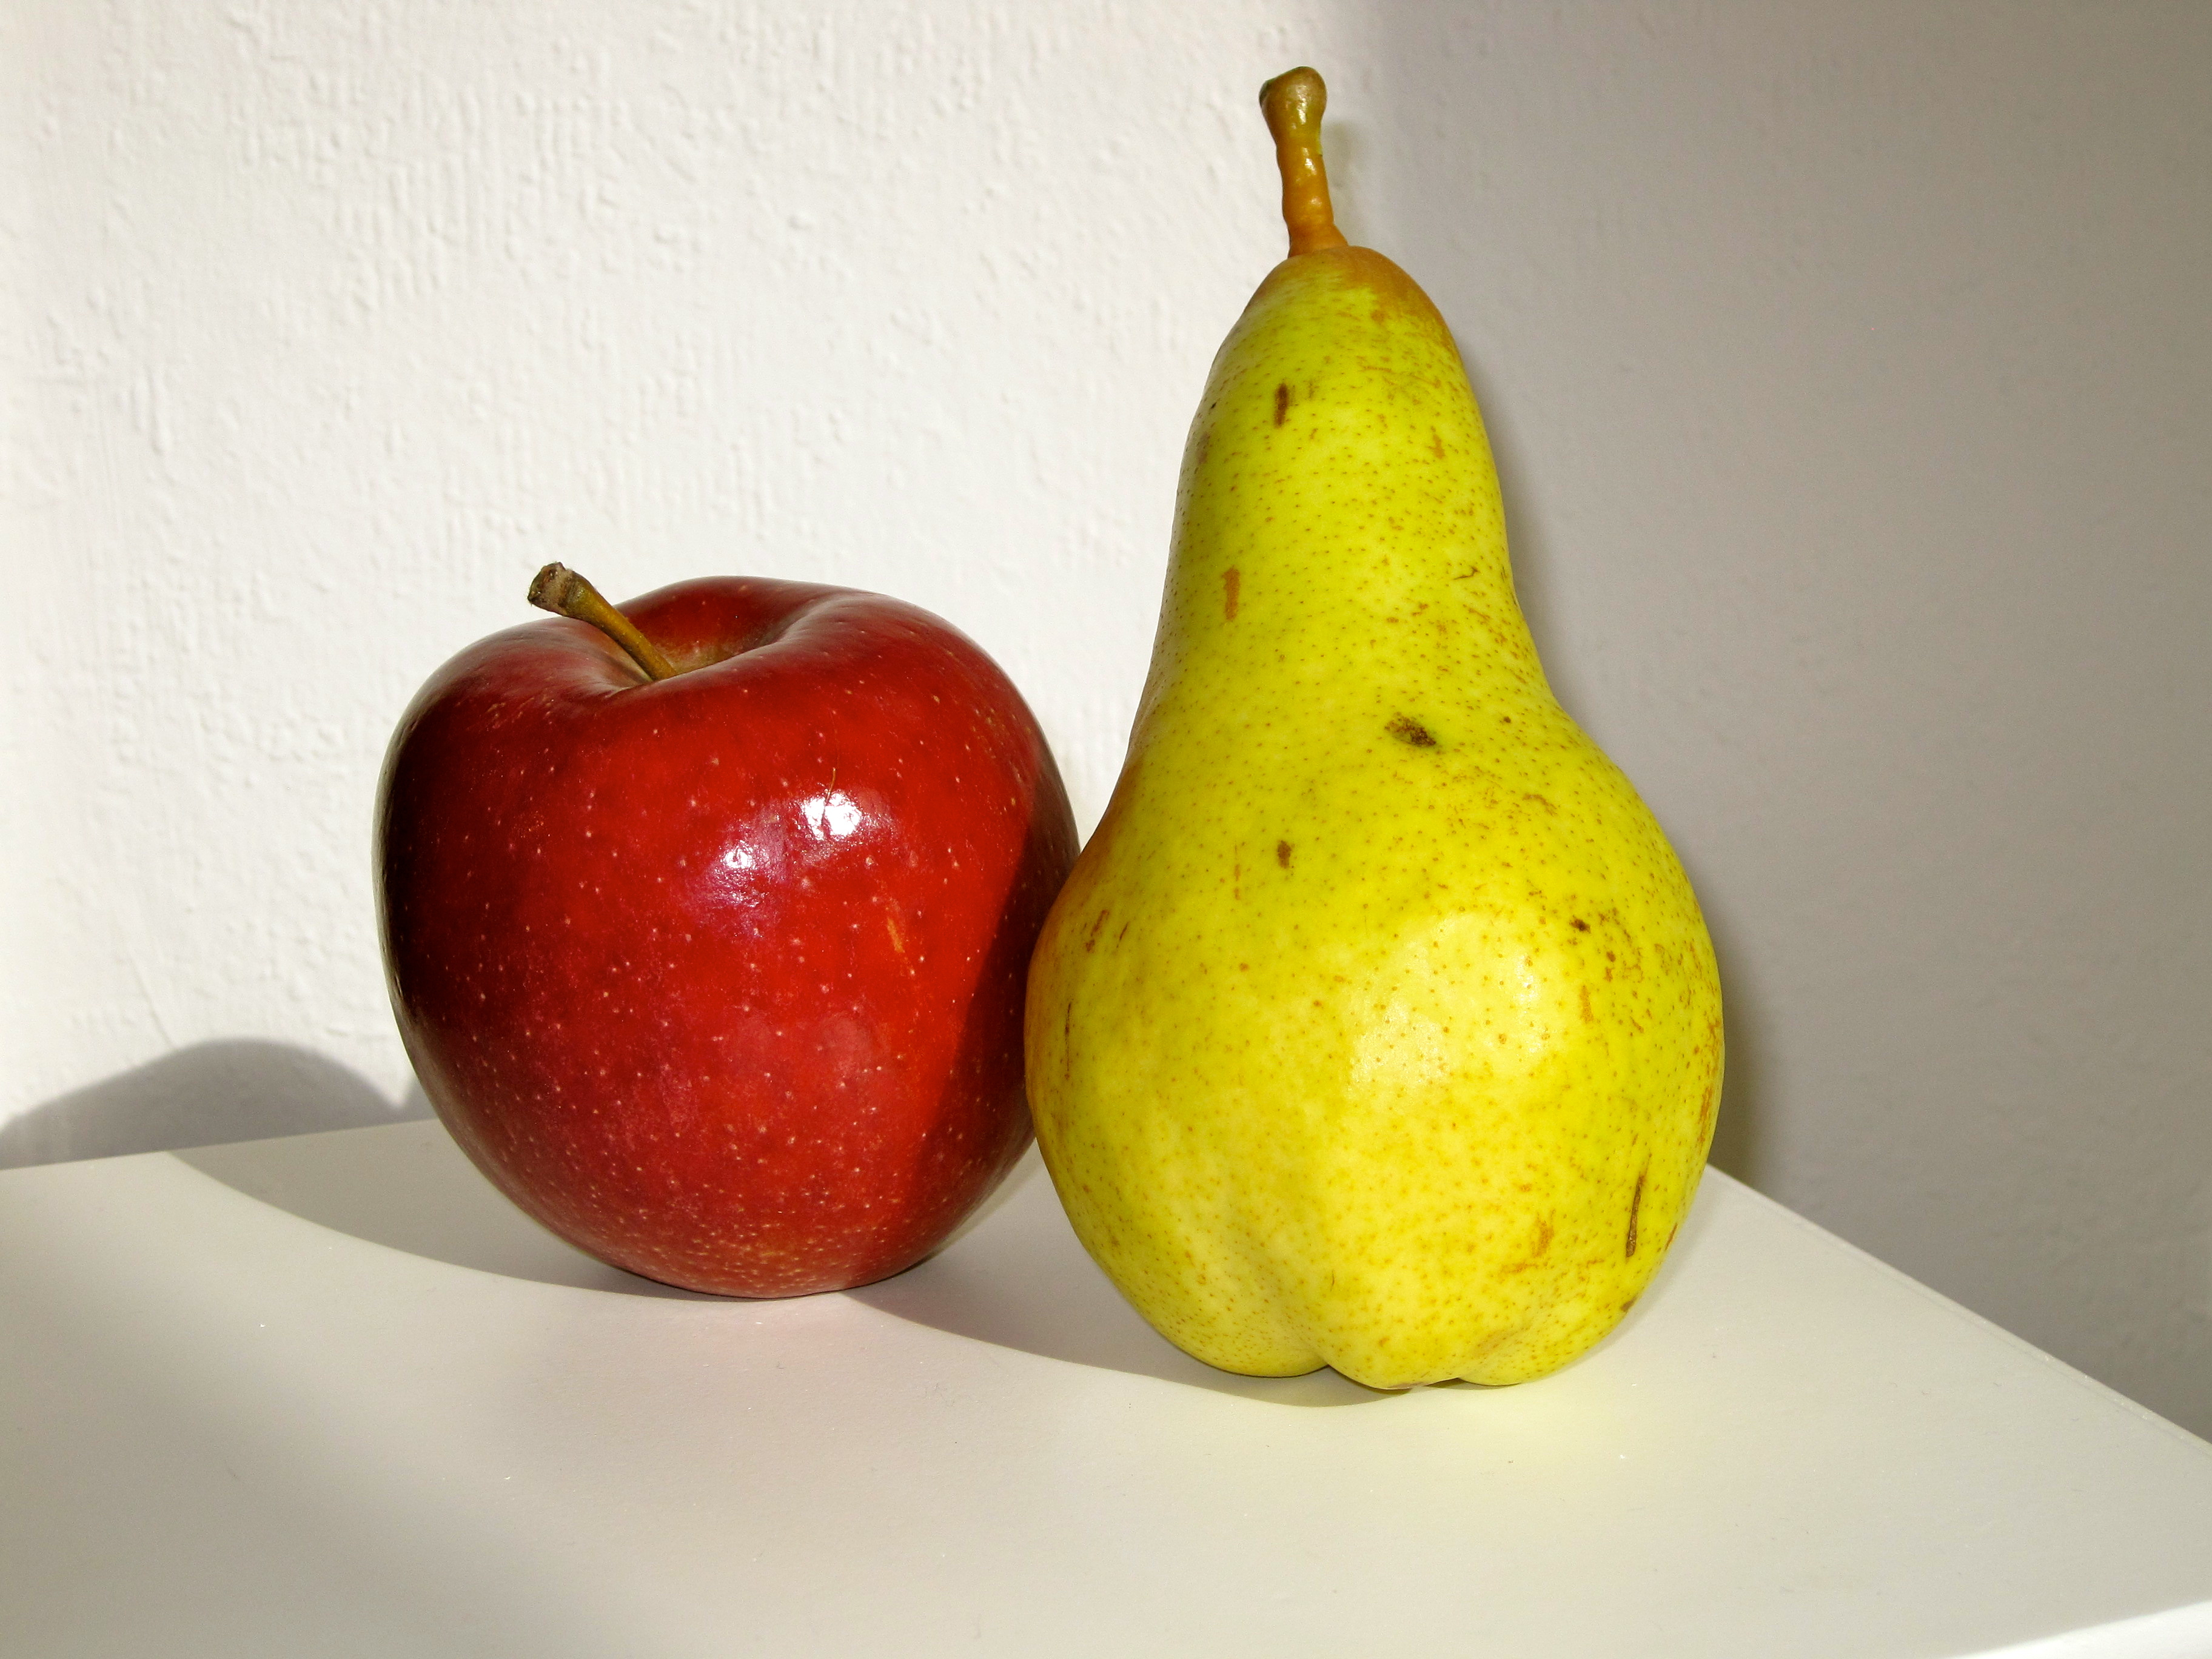 File:Apple and pear.jpg - Wikimedia Commons